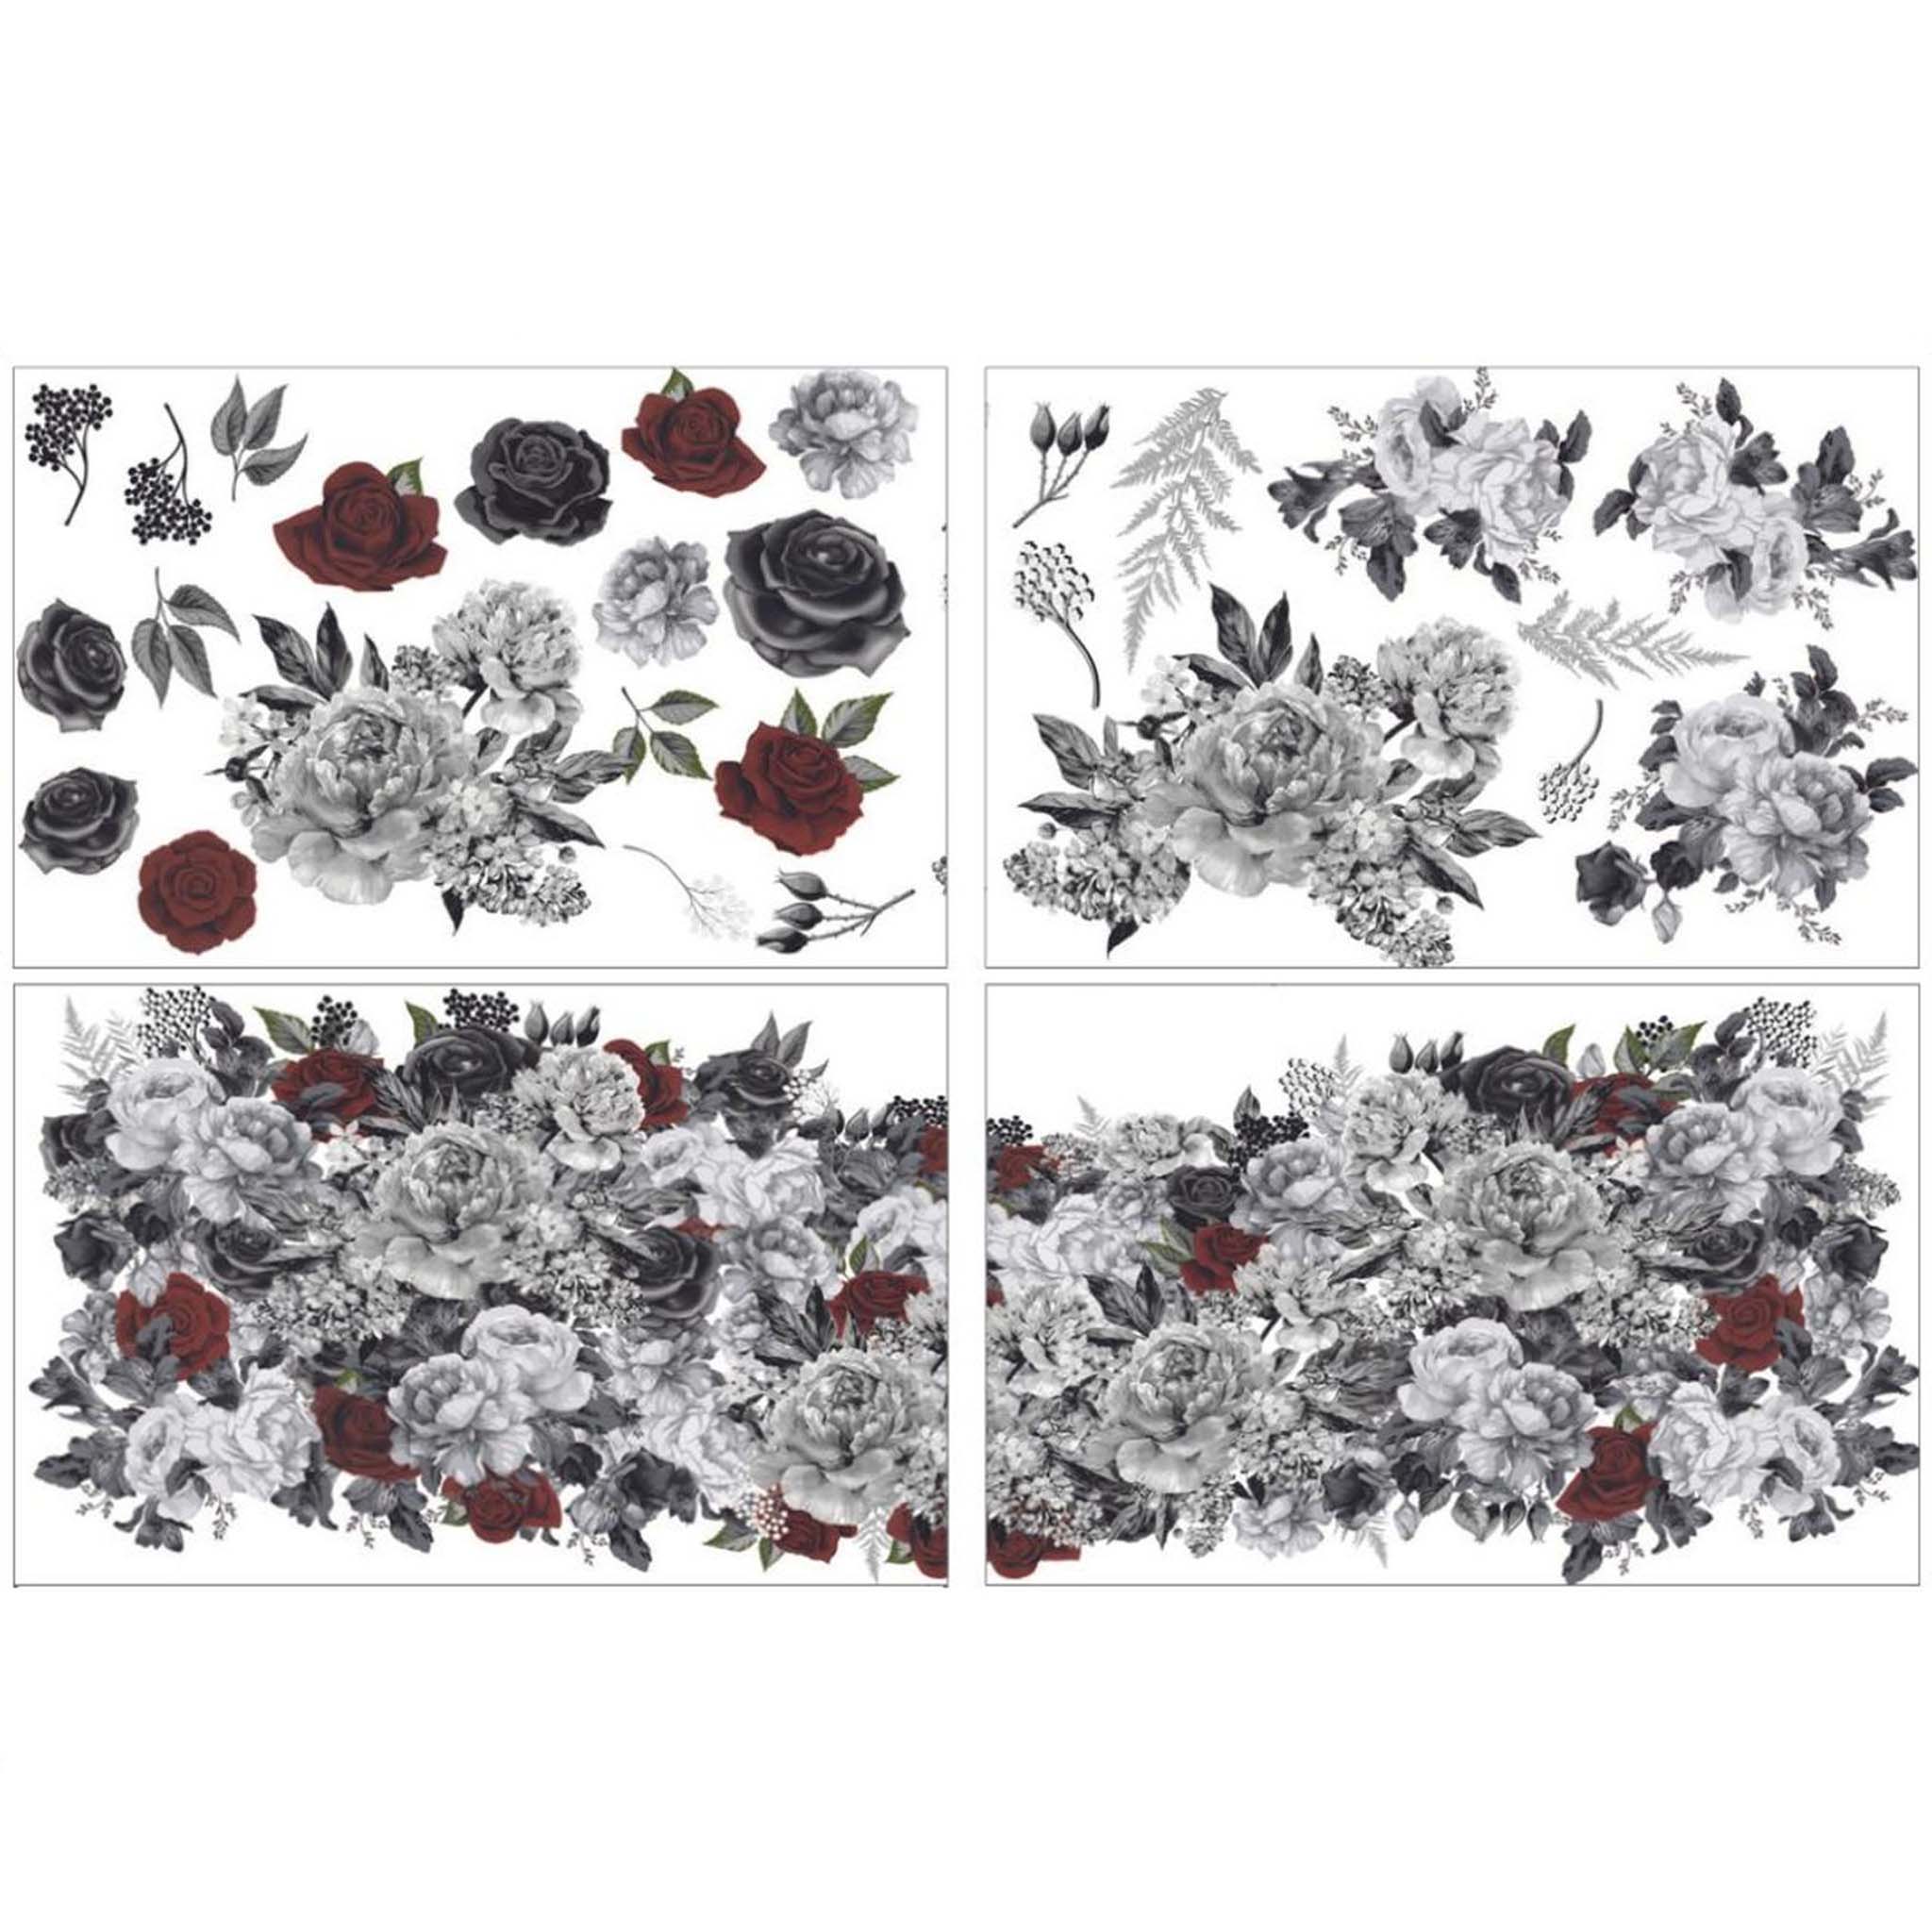 Four sheets of a rub-on transfer design featuring a bold black and white floral bouquets and flowers, accented with pops of vibrant red.  